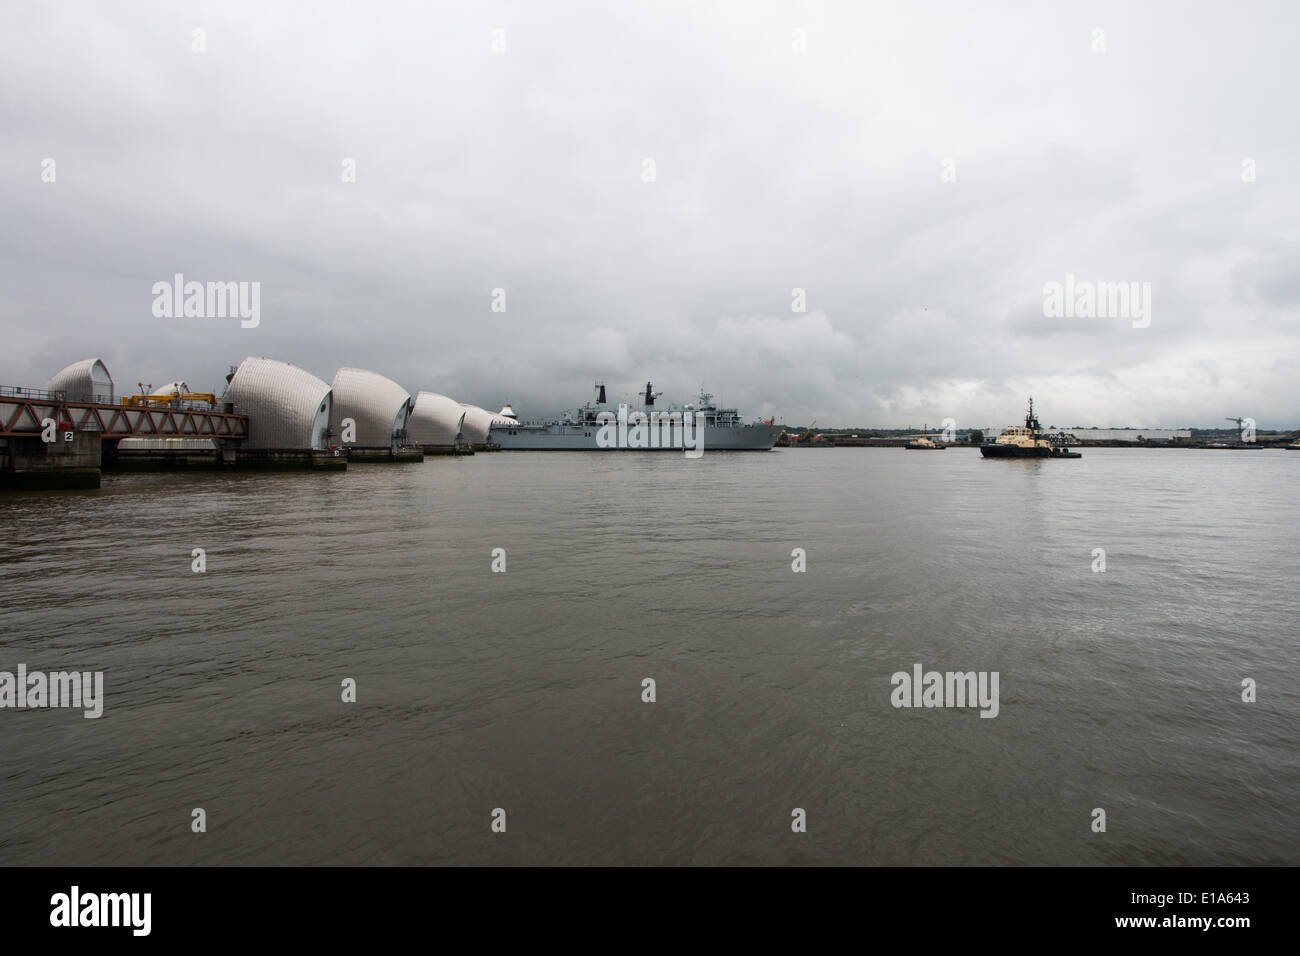 LONDON, UK, 28th May, 2014. HMS Bulwark, an Albion Class assault ship and flagship of the Royal Navy passes the Thames Barrier on its way to spend a few days at Greenwich to help mark the 350th anniversary of the Royal Marines © Steve Bright/Alamy Live News Stock Photo